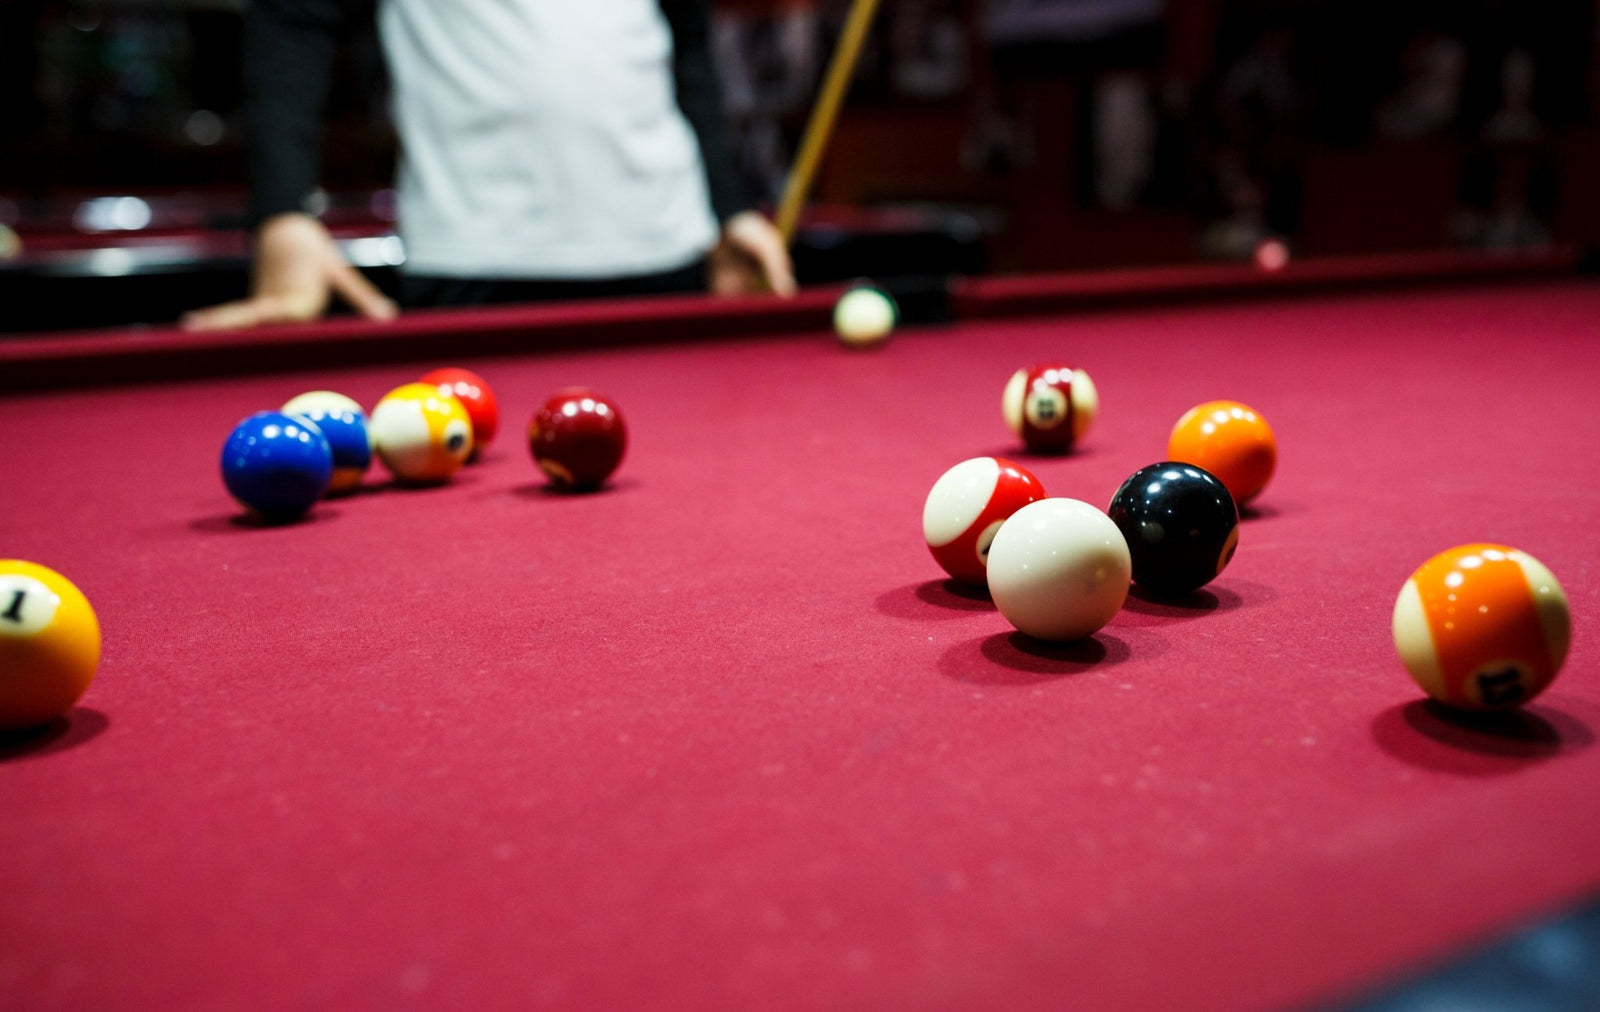 Patterns and Positioning for Winning Billiards Games - Billiard and Pool Center